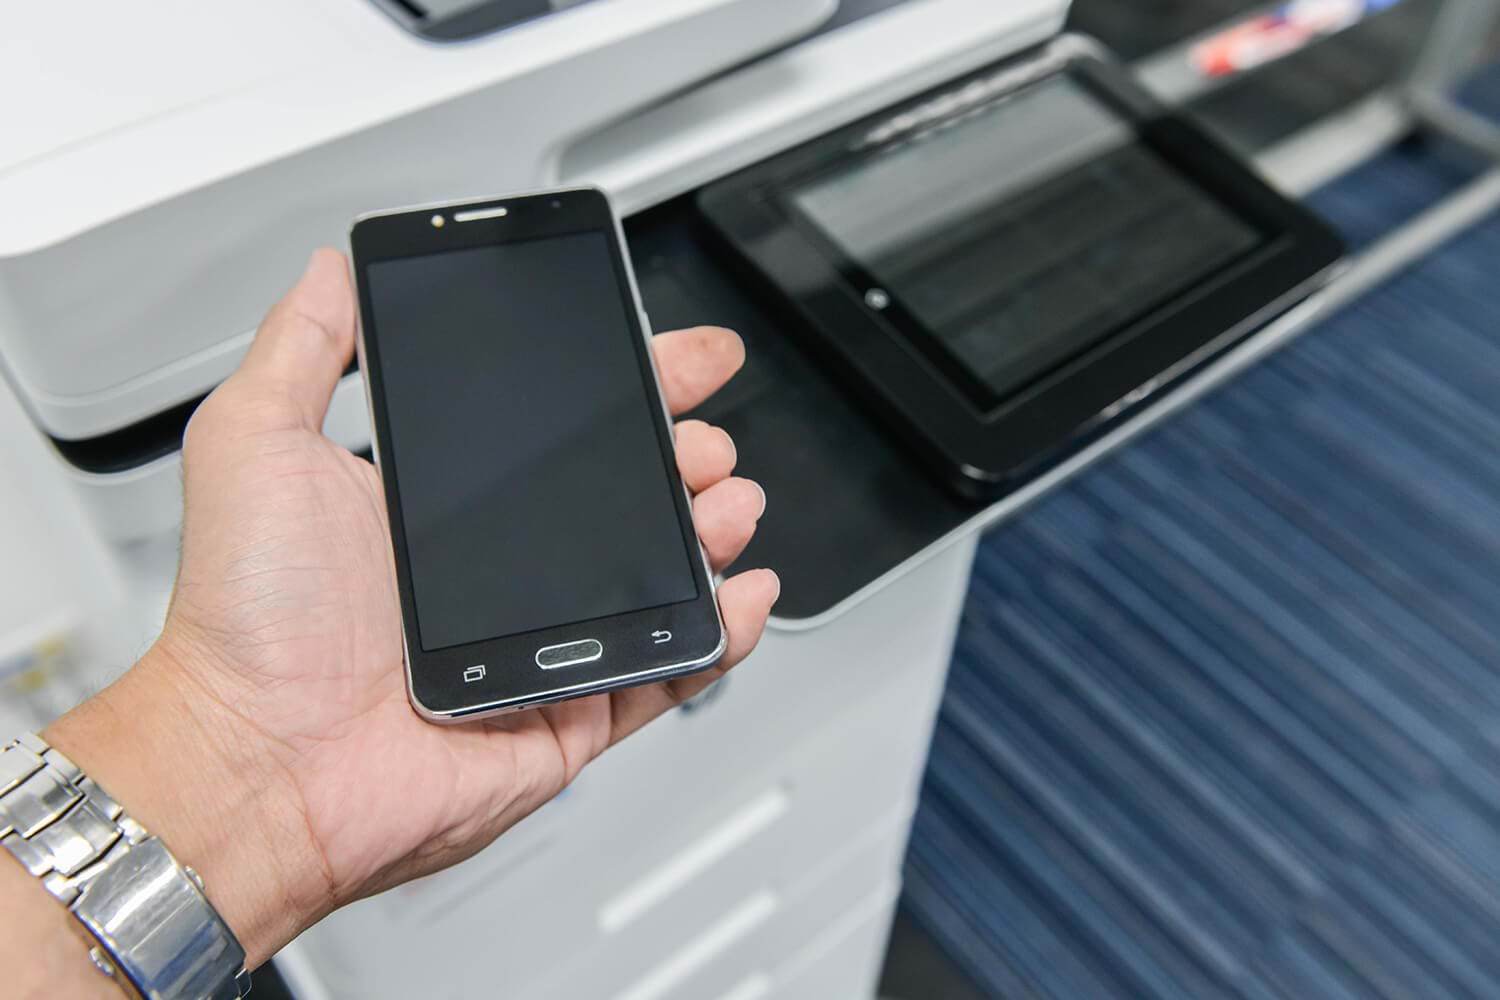 Close Up of Hand Holding Smart Phone in Front of Office Printer